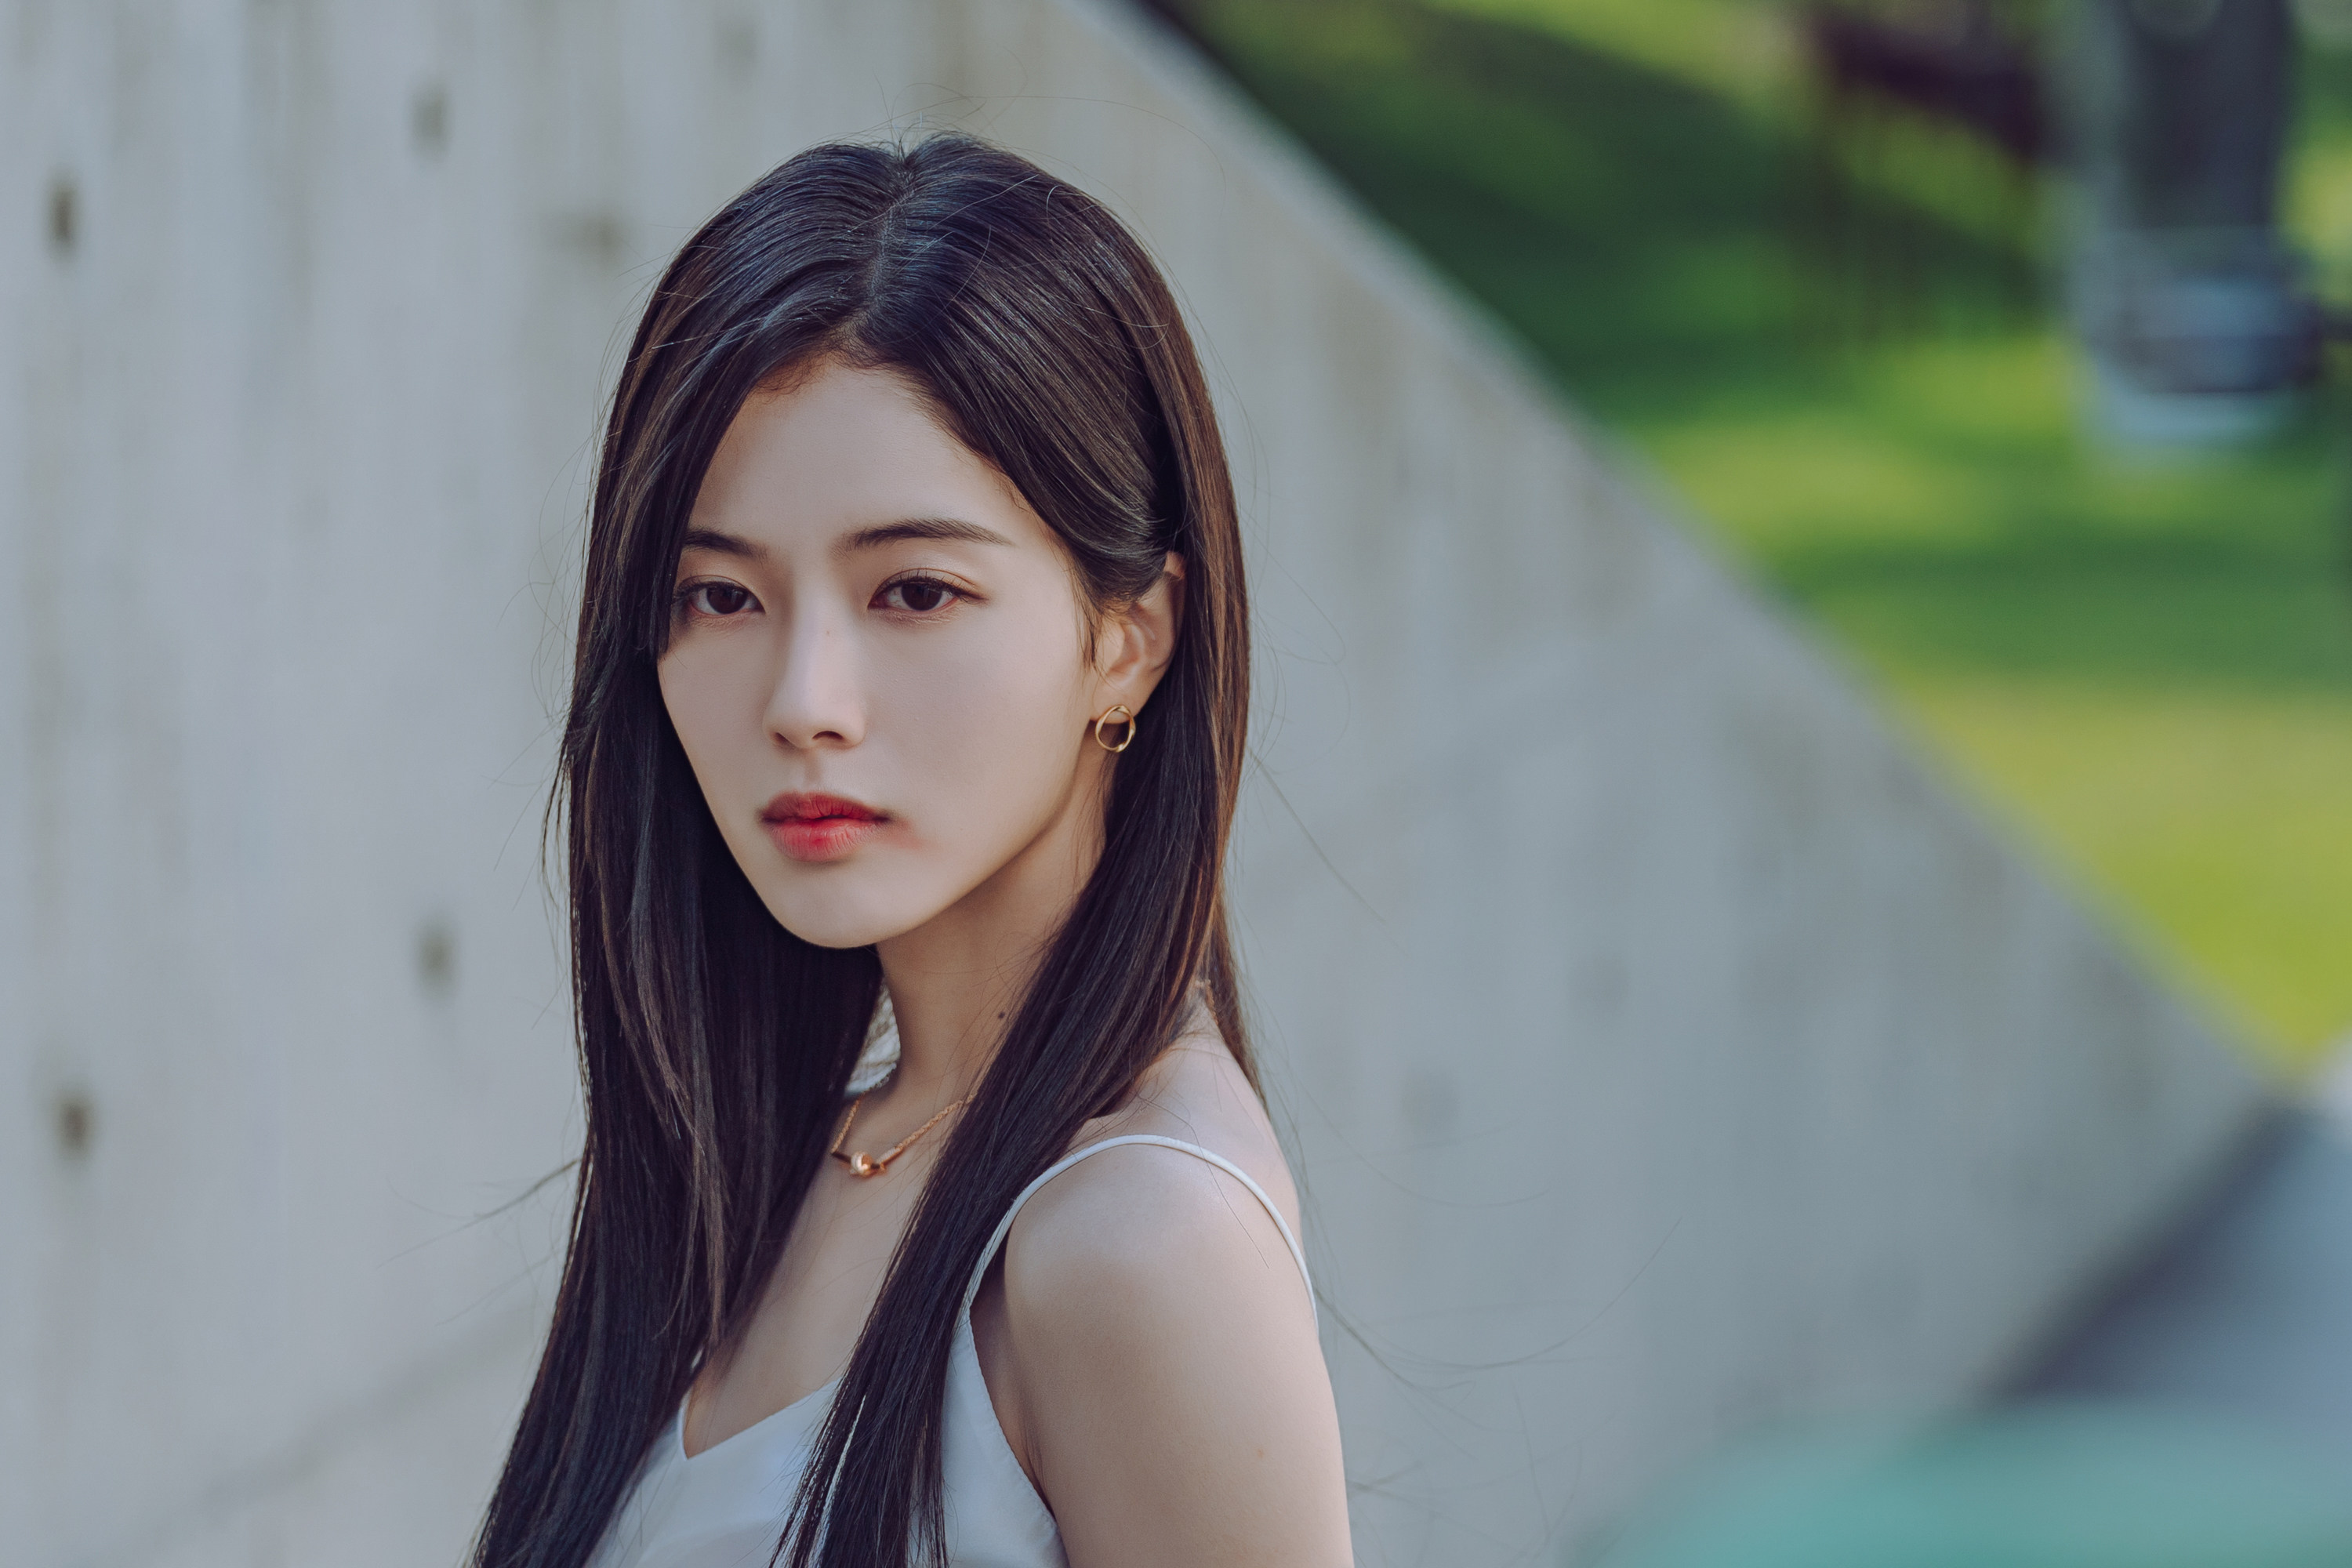 Roh Jeong-eui in a still from Hierarchy, a K-drama series launching in June on Netflix. Photo: Netflix